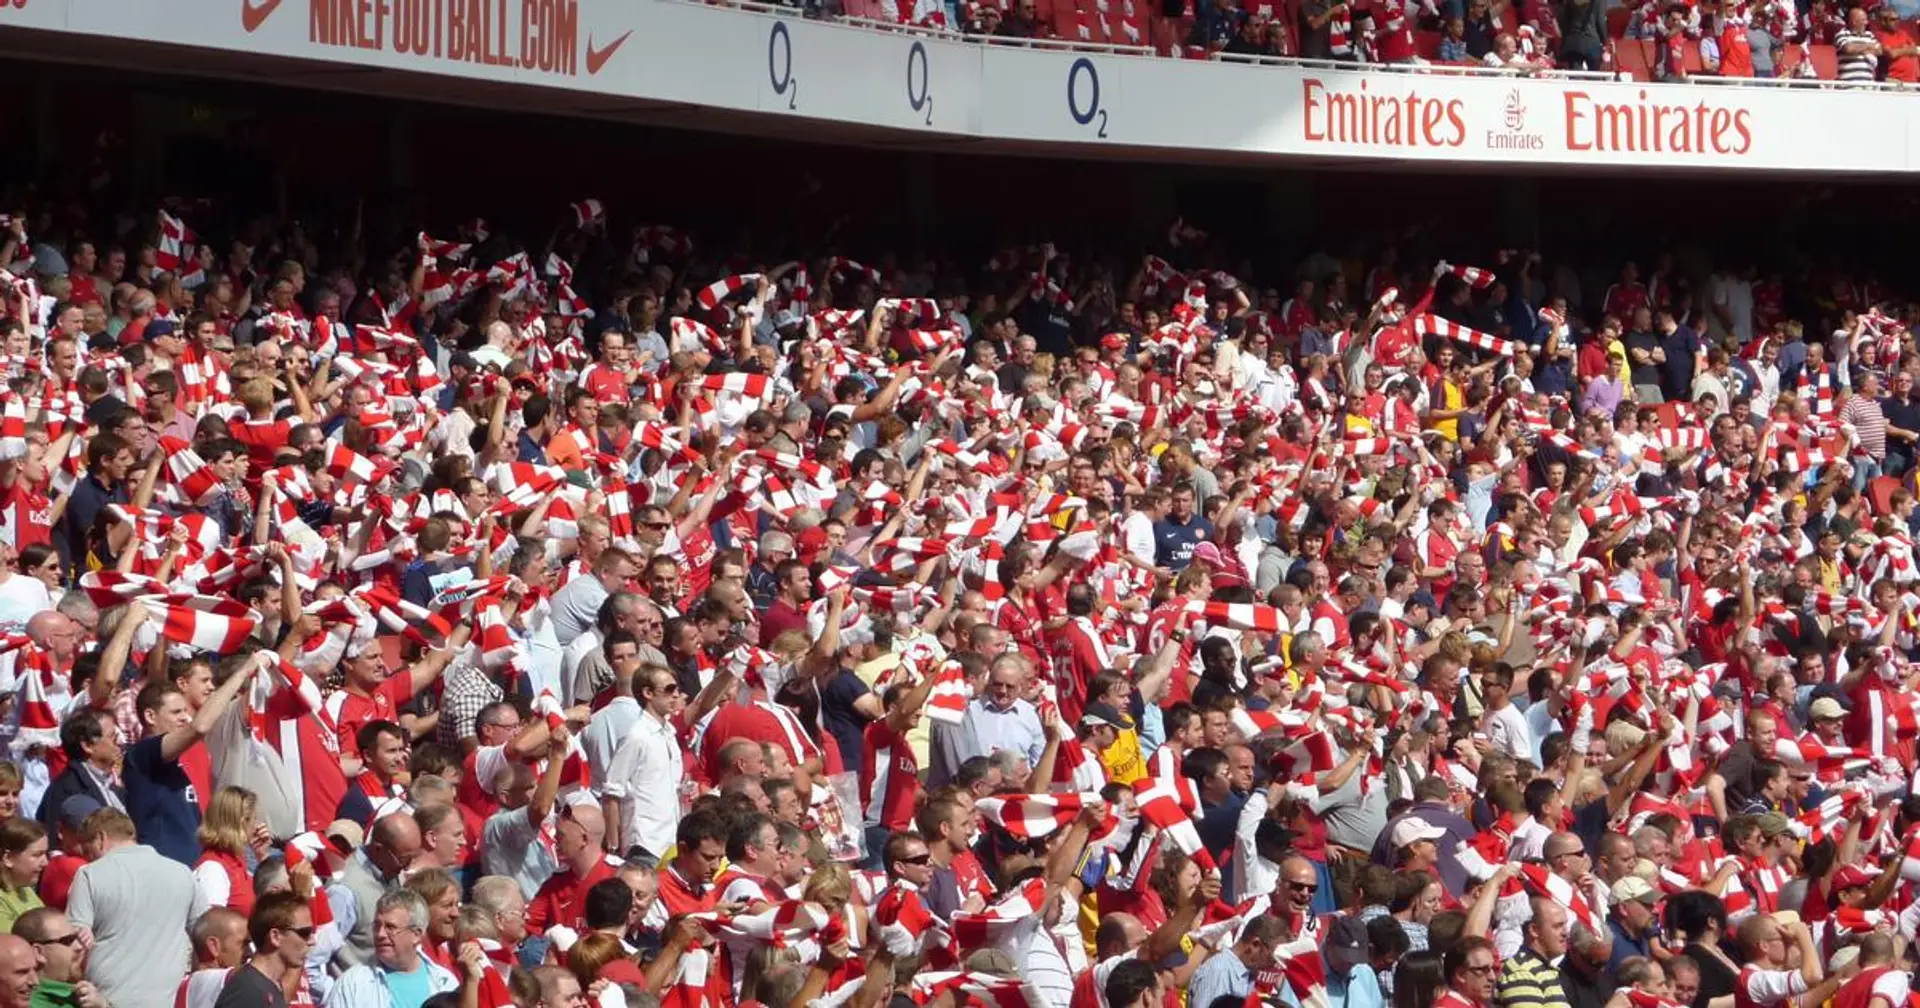 10,000 Fans to be allowed back to stadiums for last game of season